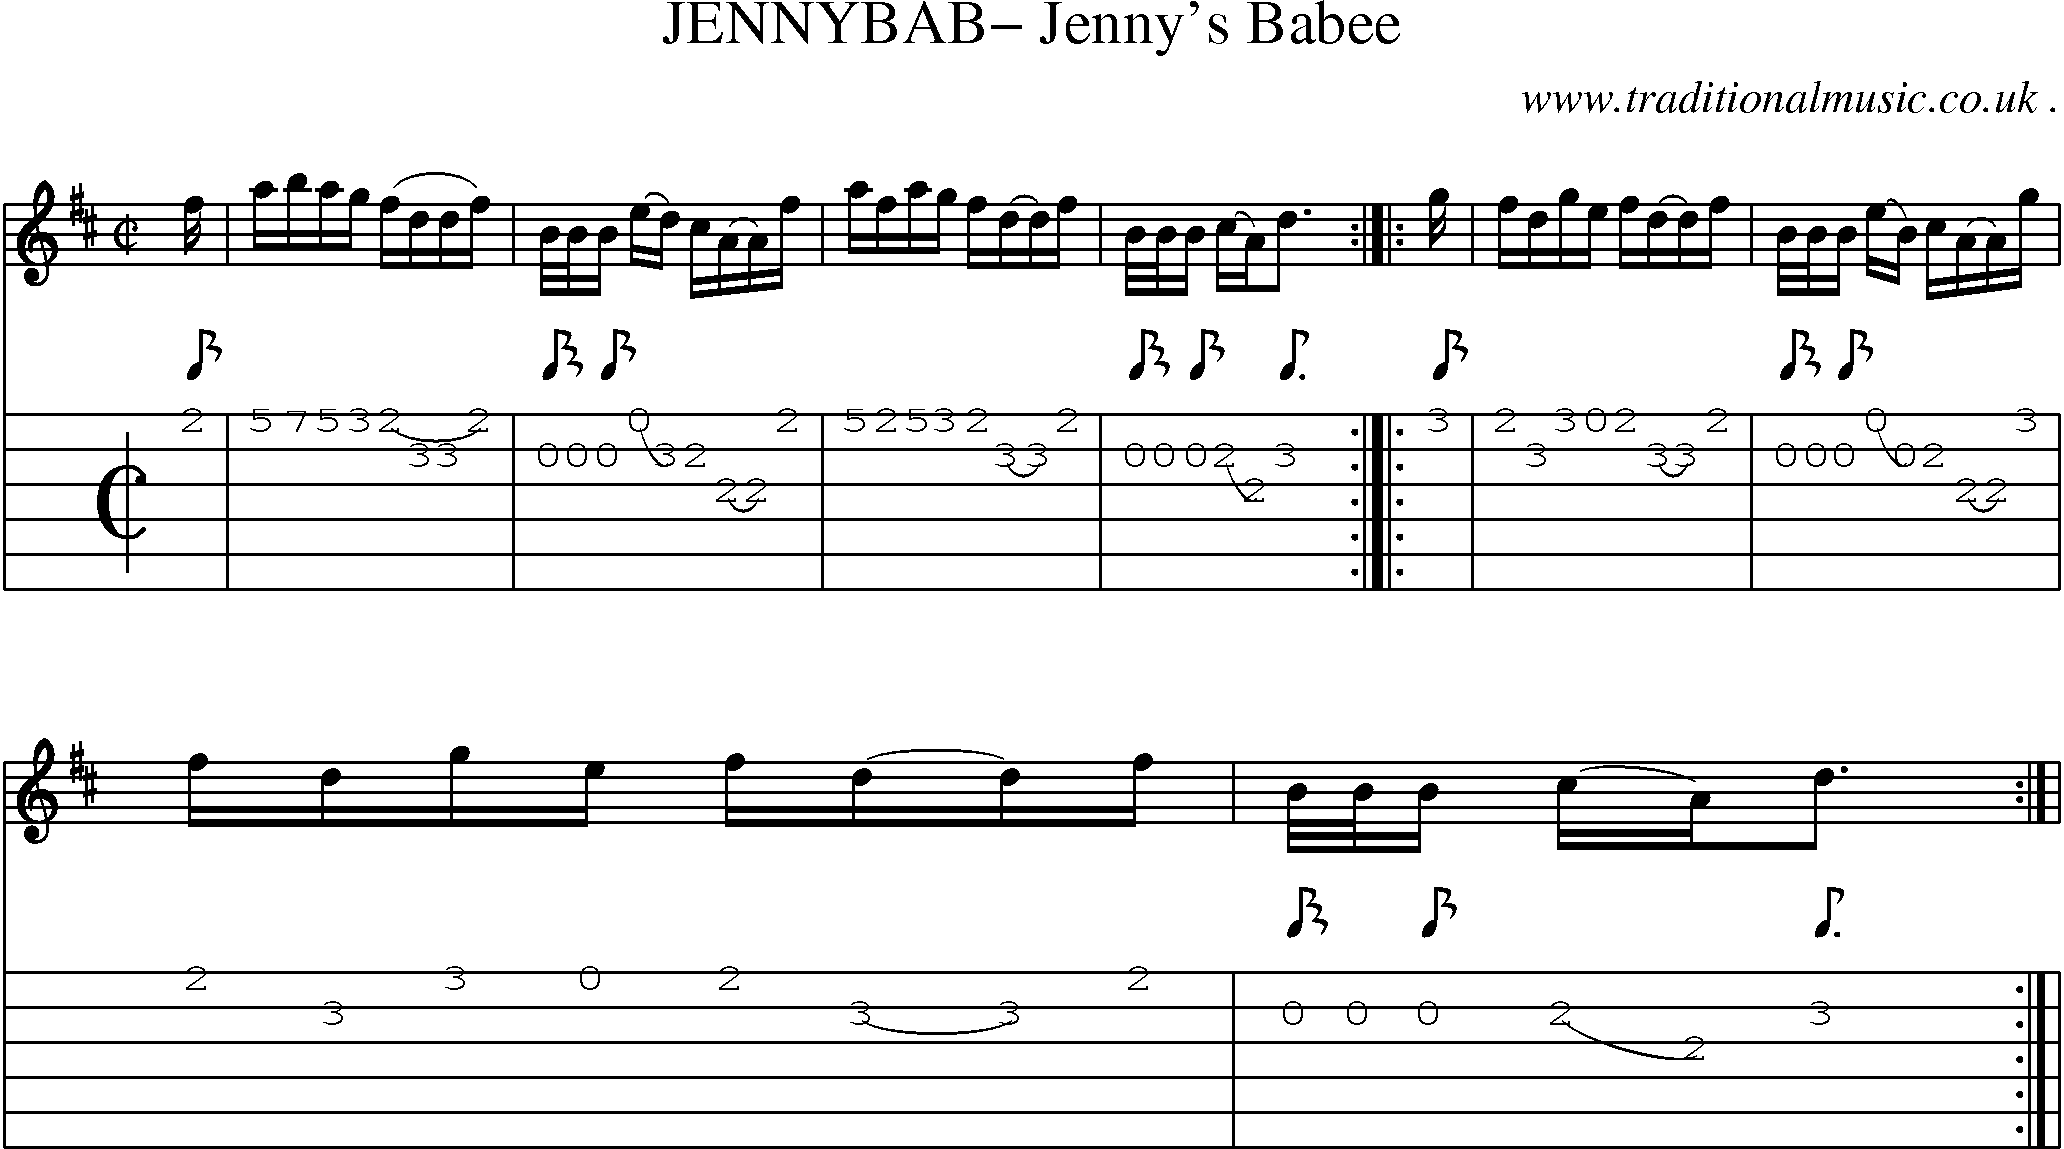 Sheet-Music and Guitar Tabs for Jennybab Jennys Babee